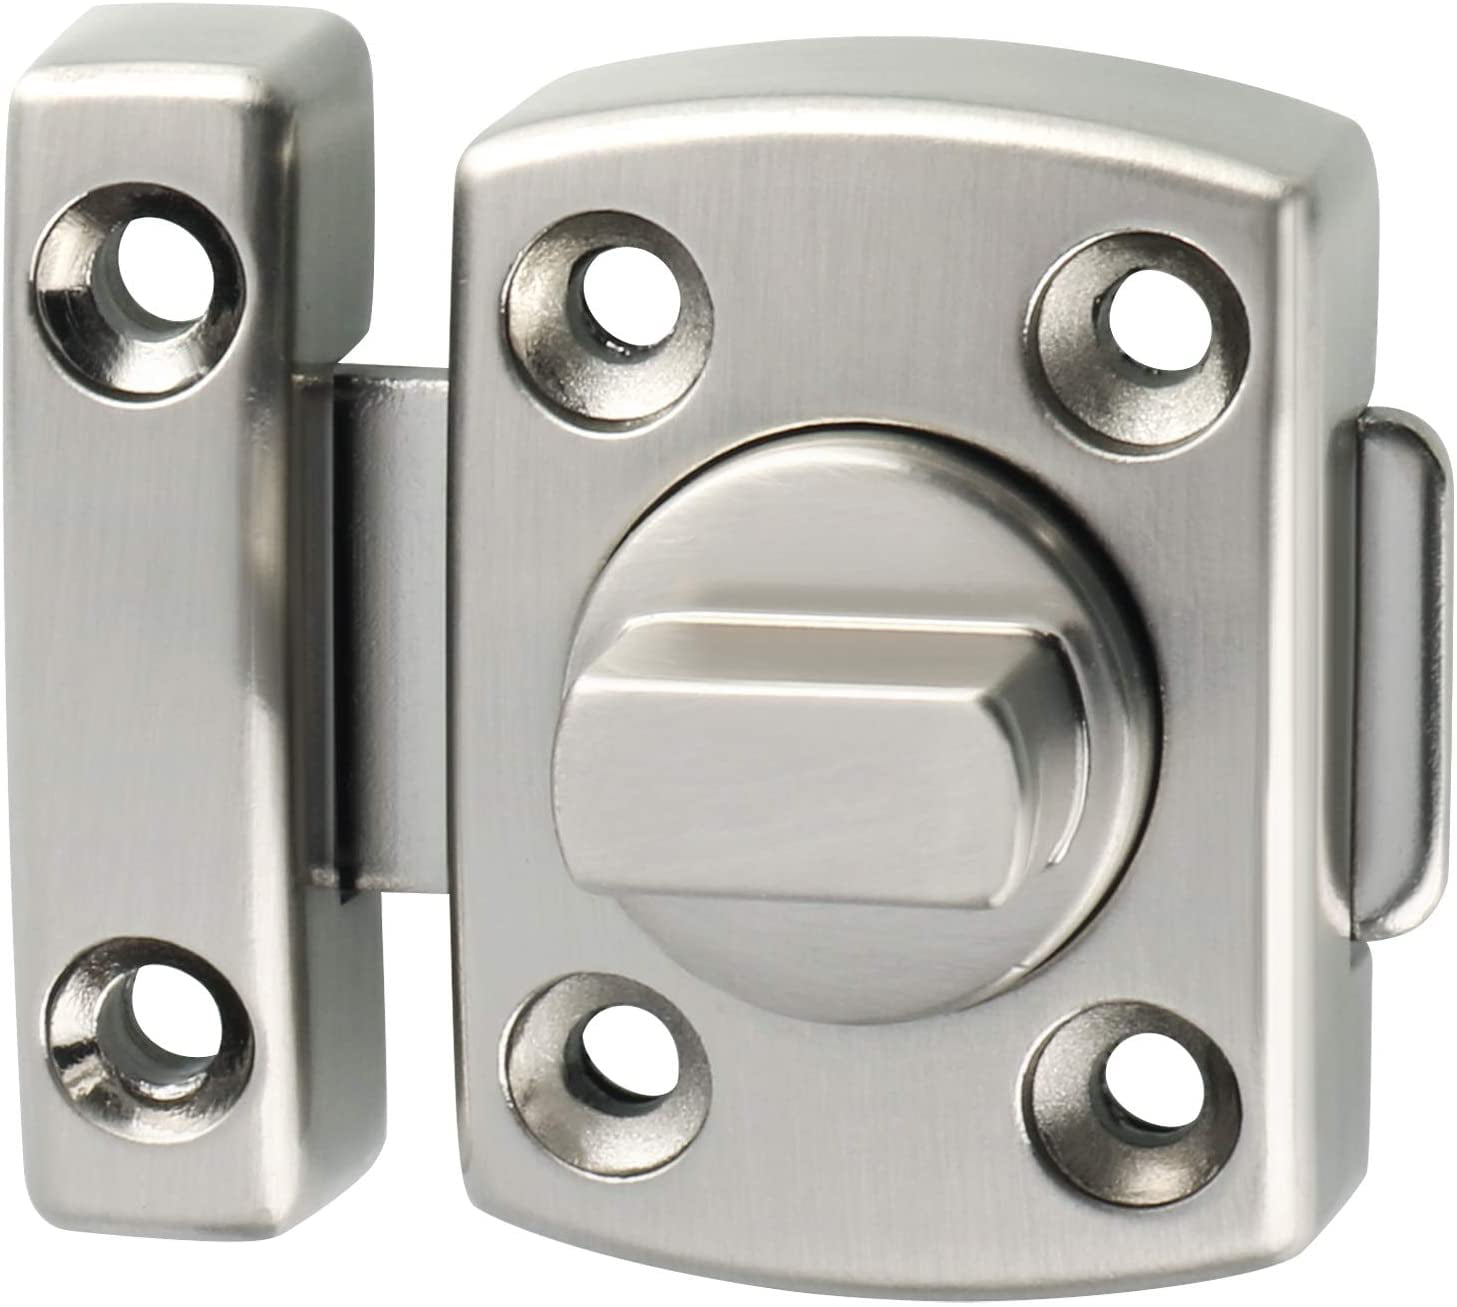 Rotate Bolt Latch Gate Latches Safety Door Slide Lock MS220U Brushed Finish 